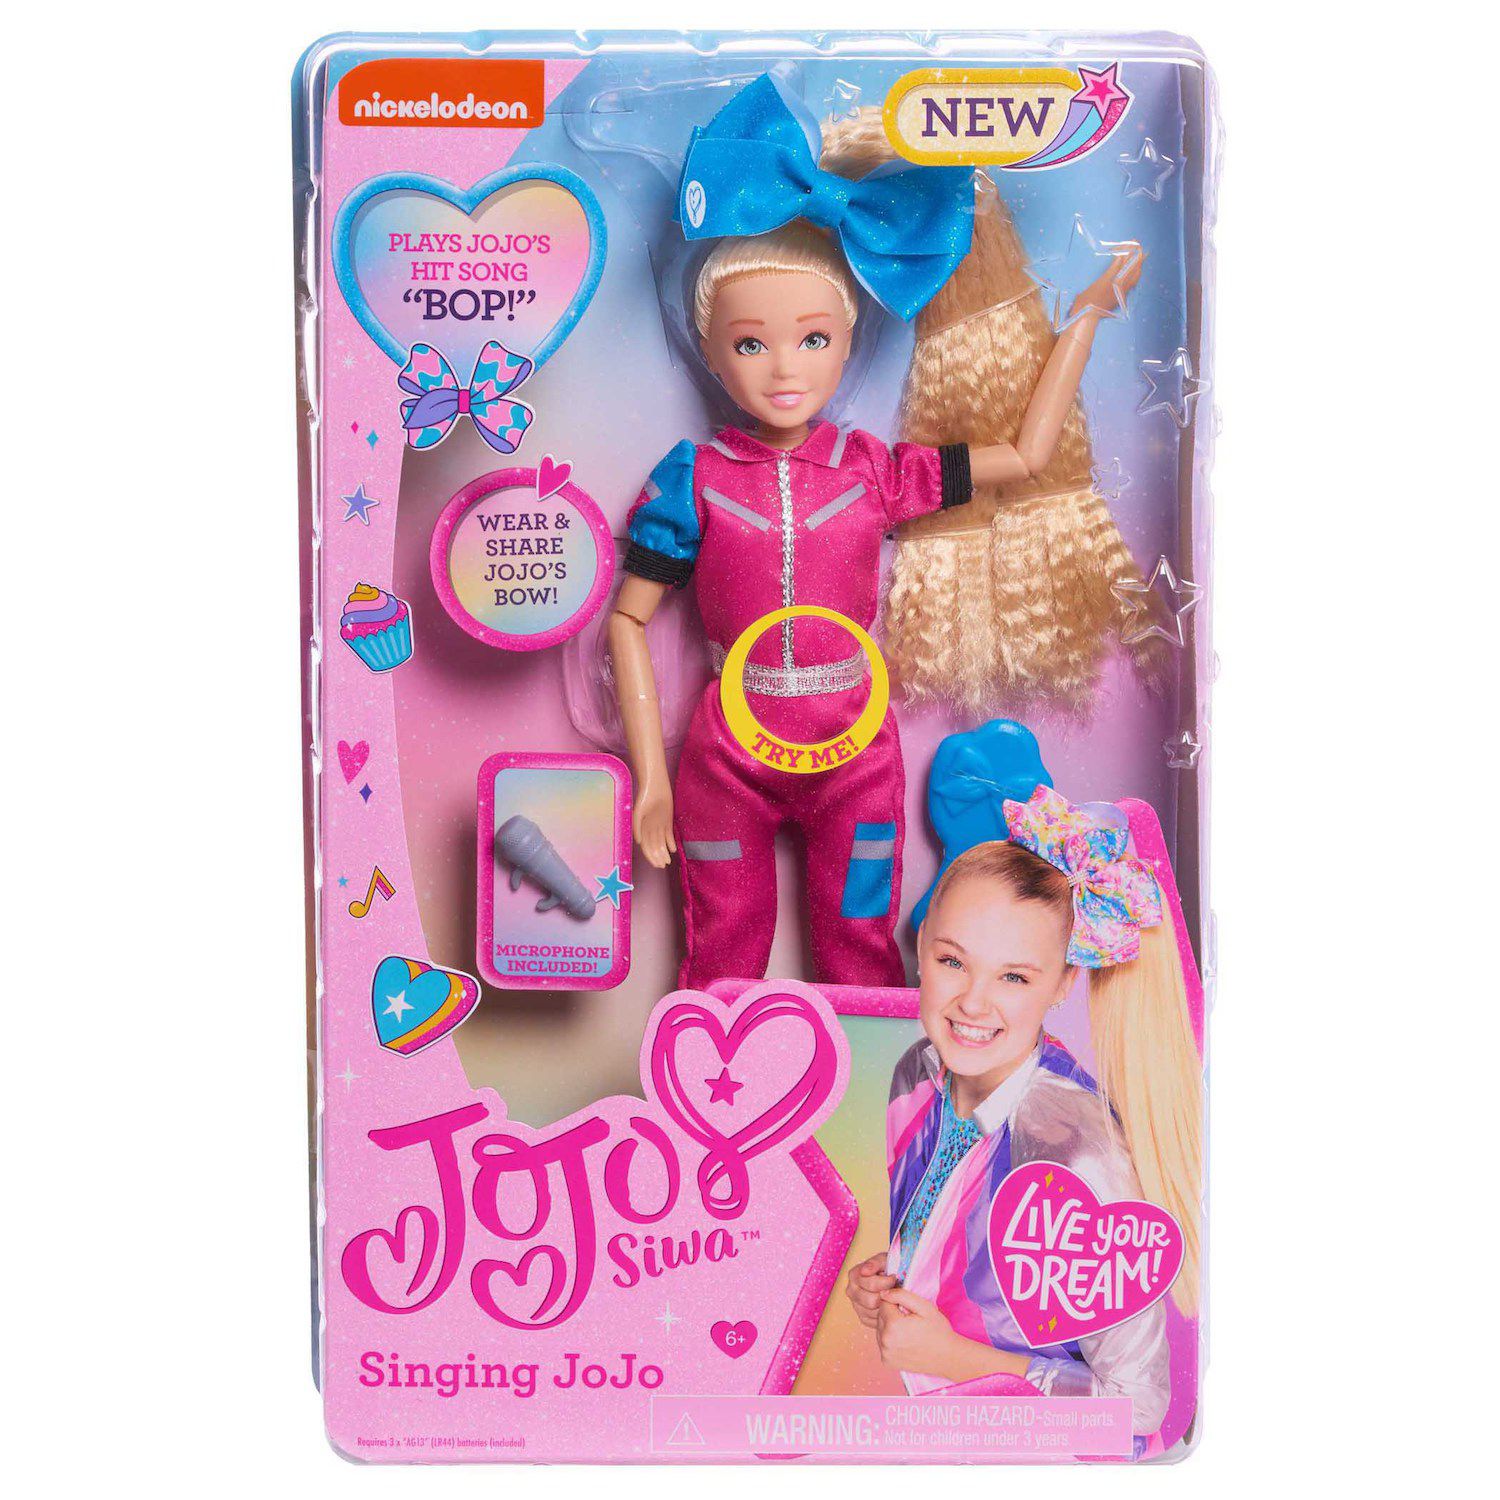 where can i find a jojo doll